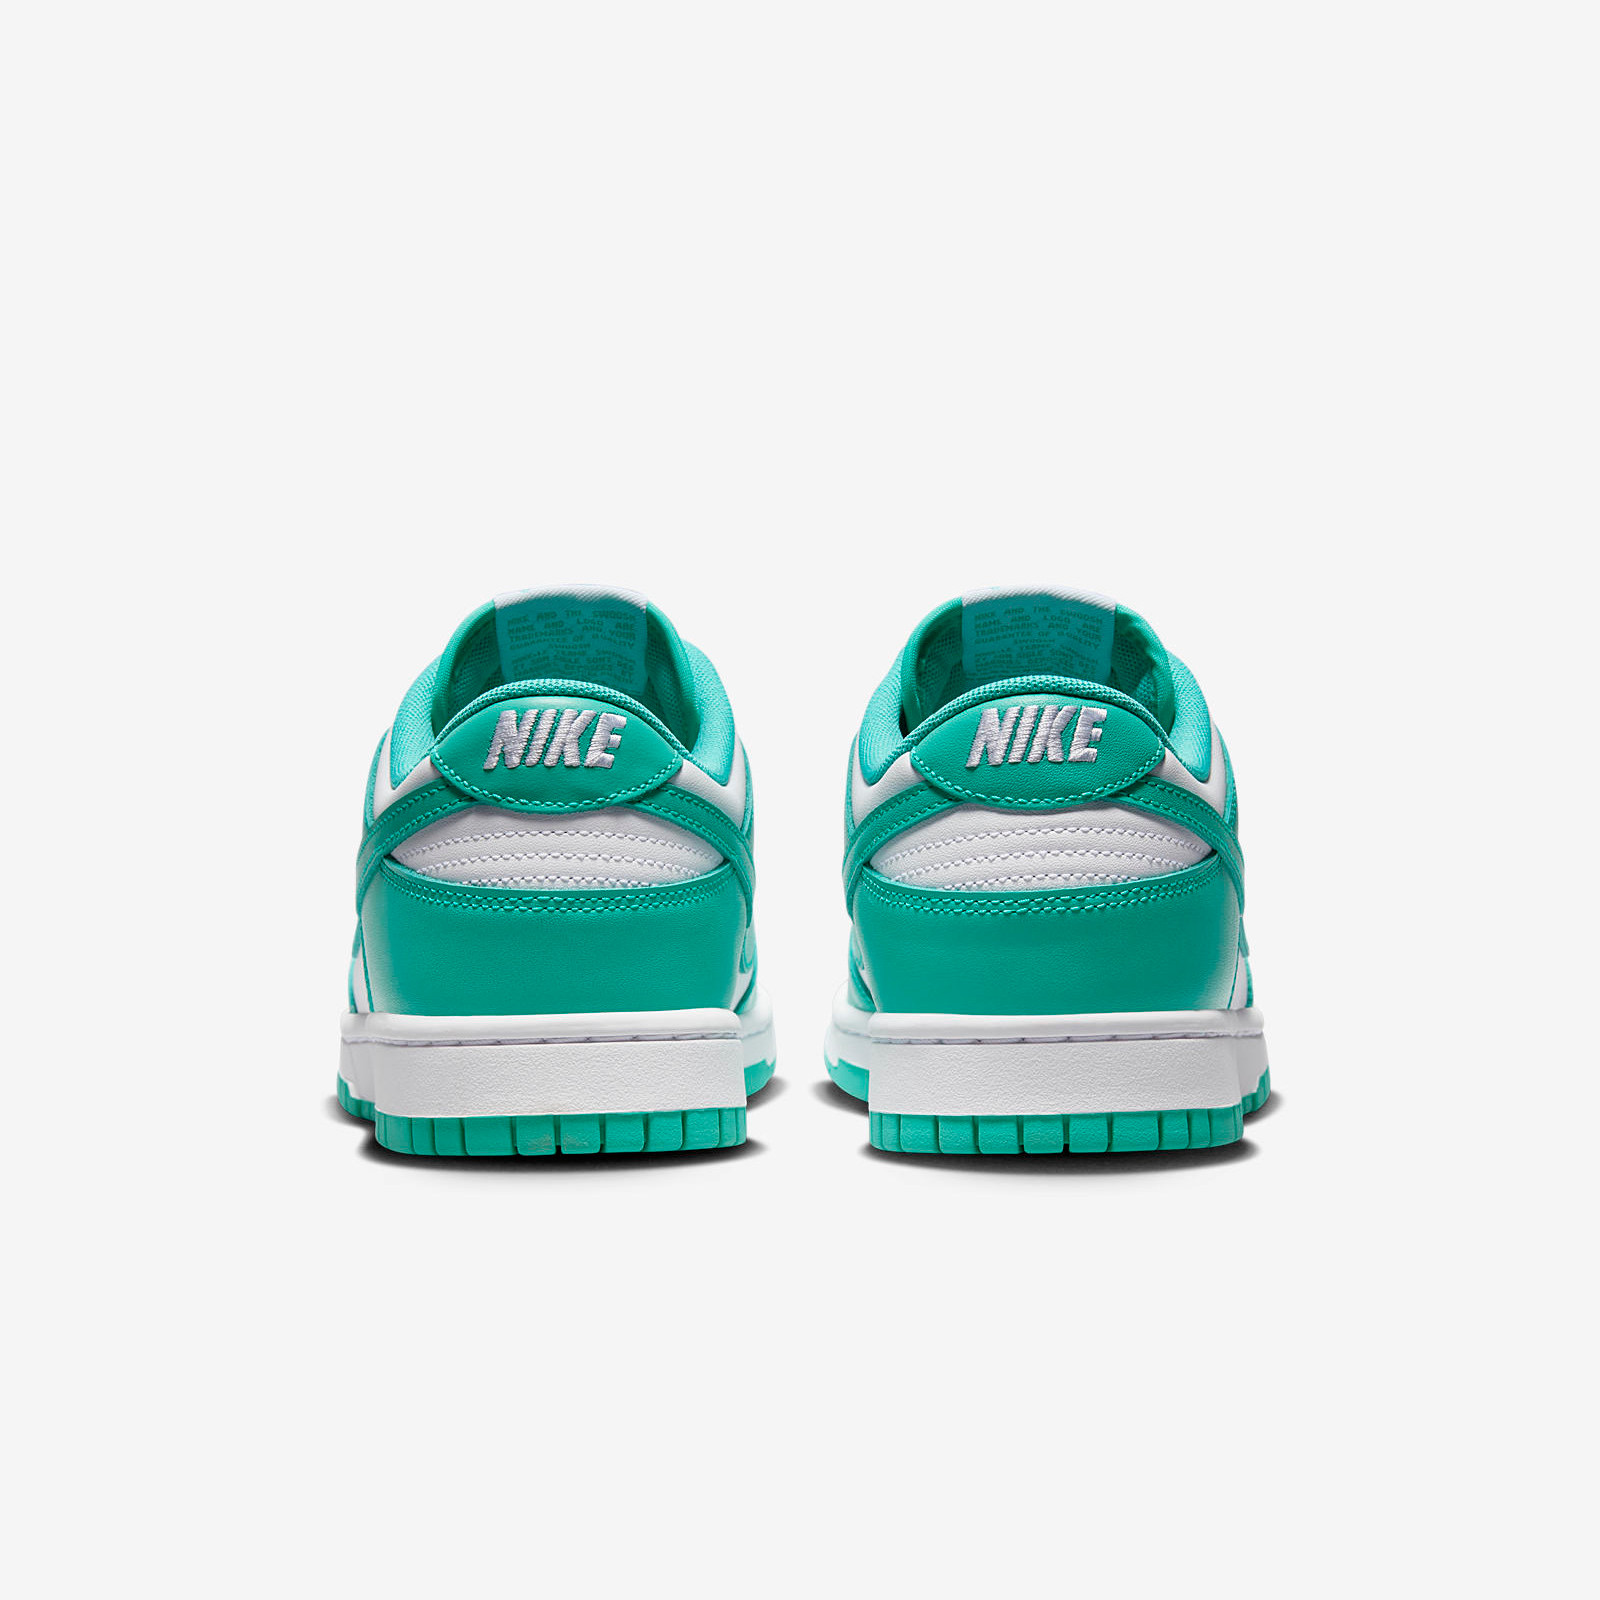 Nike Dunk Low
« Clear Jade »